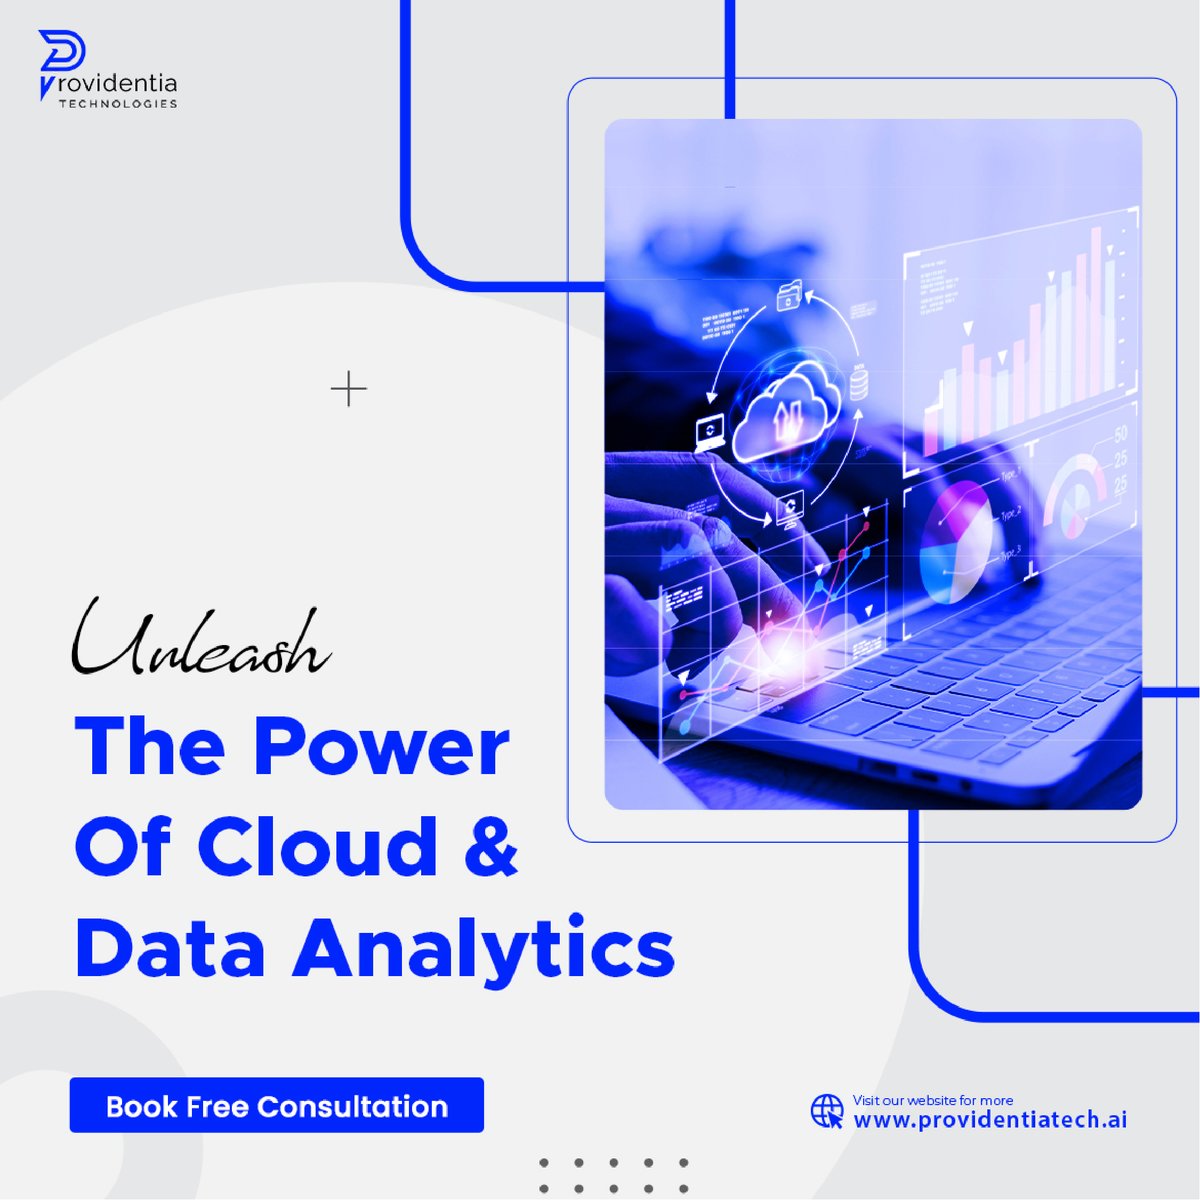 We Offer unique AI-ML-empowered data solutions for your business, helping you to stay ahead of the curve.
Request a demo now!

𝐅𝐨𝐫 𝐌𝐨𝐫𝐞 𝐈𝐧𝐟𝐨 𝐋𝐨𝐠 𝐎𝐧𝐭𝐨 : providentiatech.ai

#data #businessdata #businessanalytics #dataanalytics #cloudservices #databrickssi